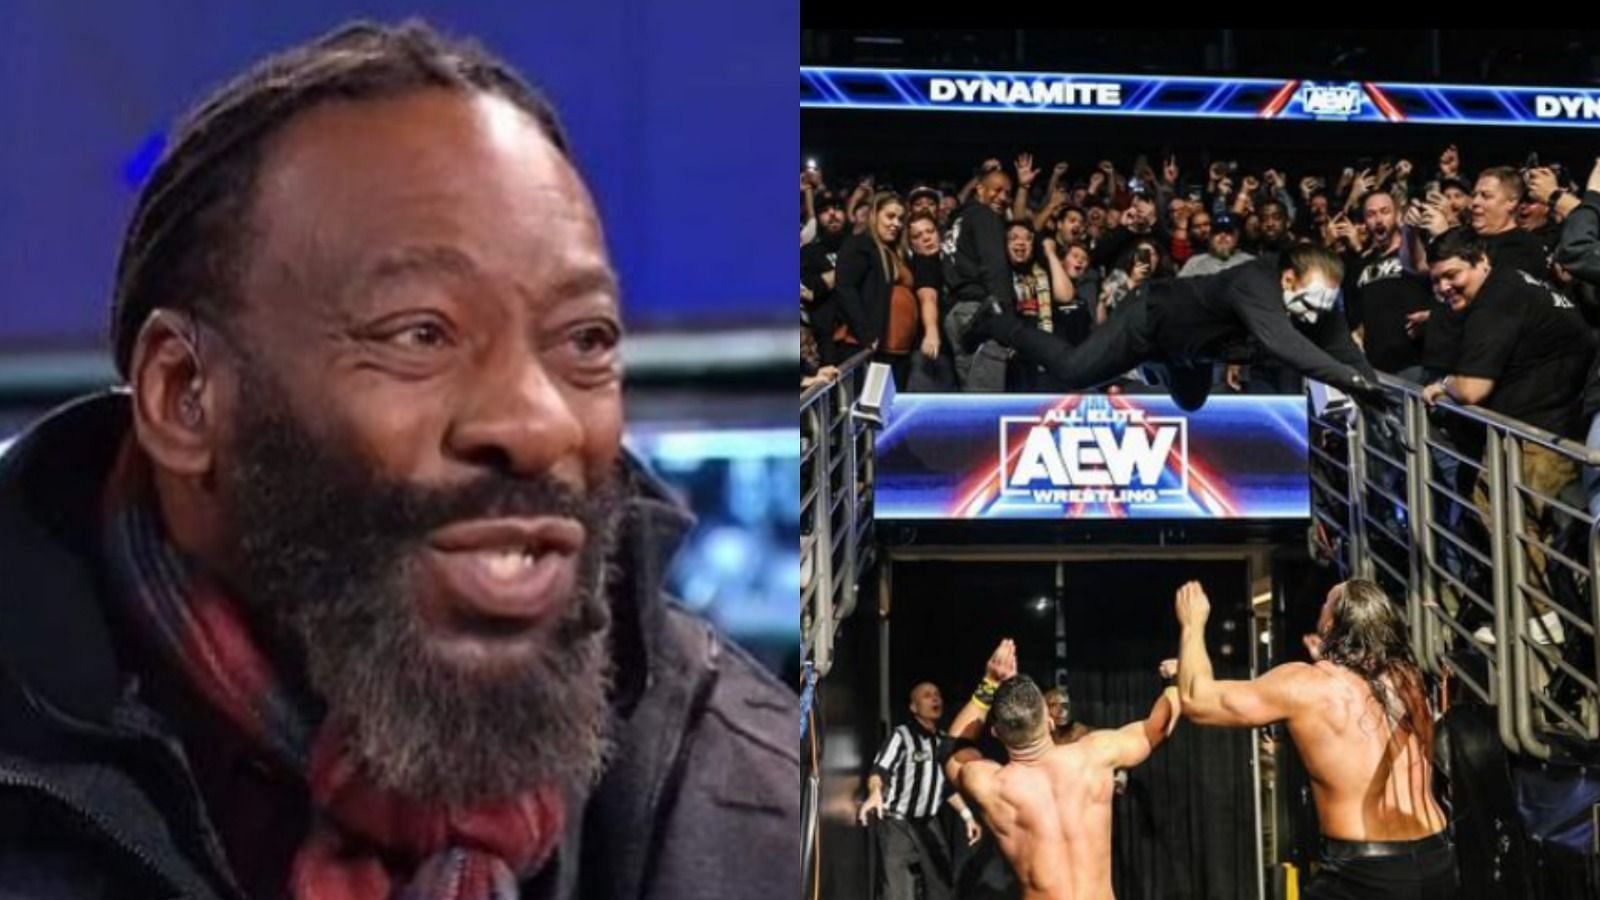 What does Booker T think about Sting wrestling at 64? [Image credits: Booker T and AEW Instagram]